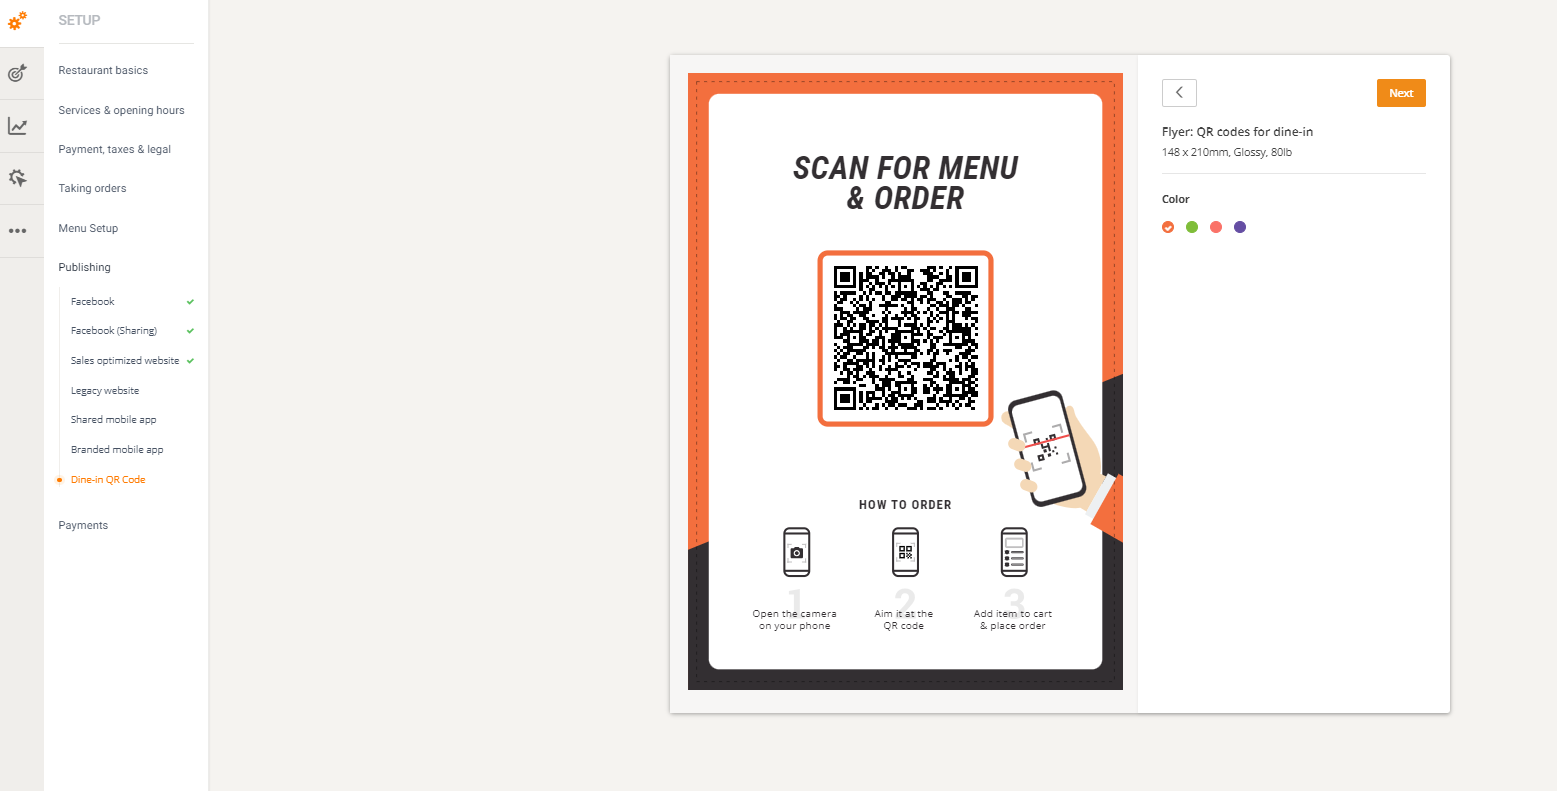 qr code flyer for contactless ordering